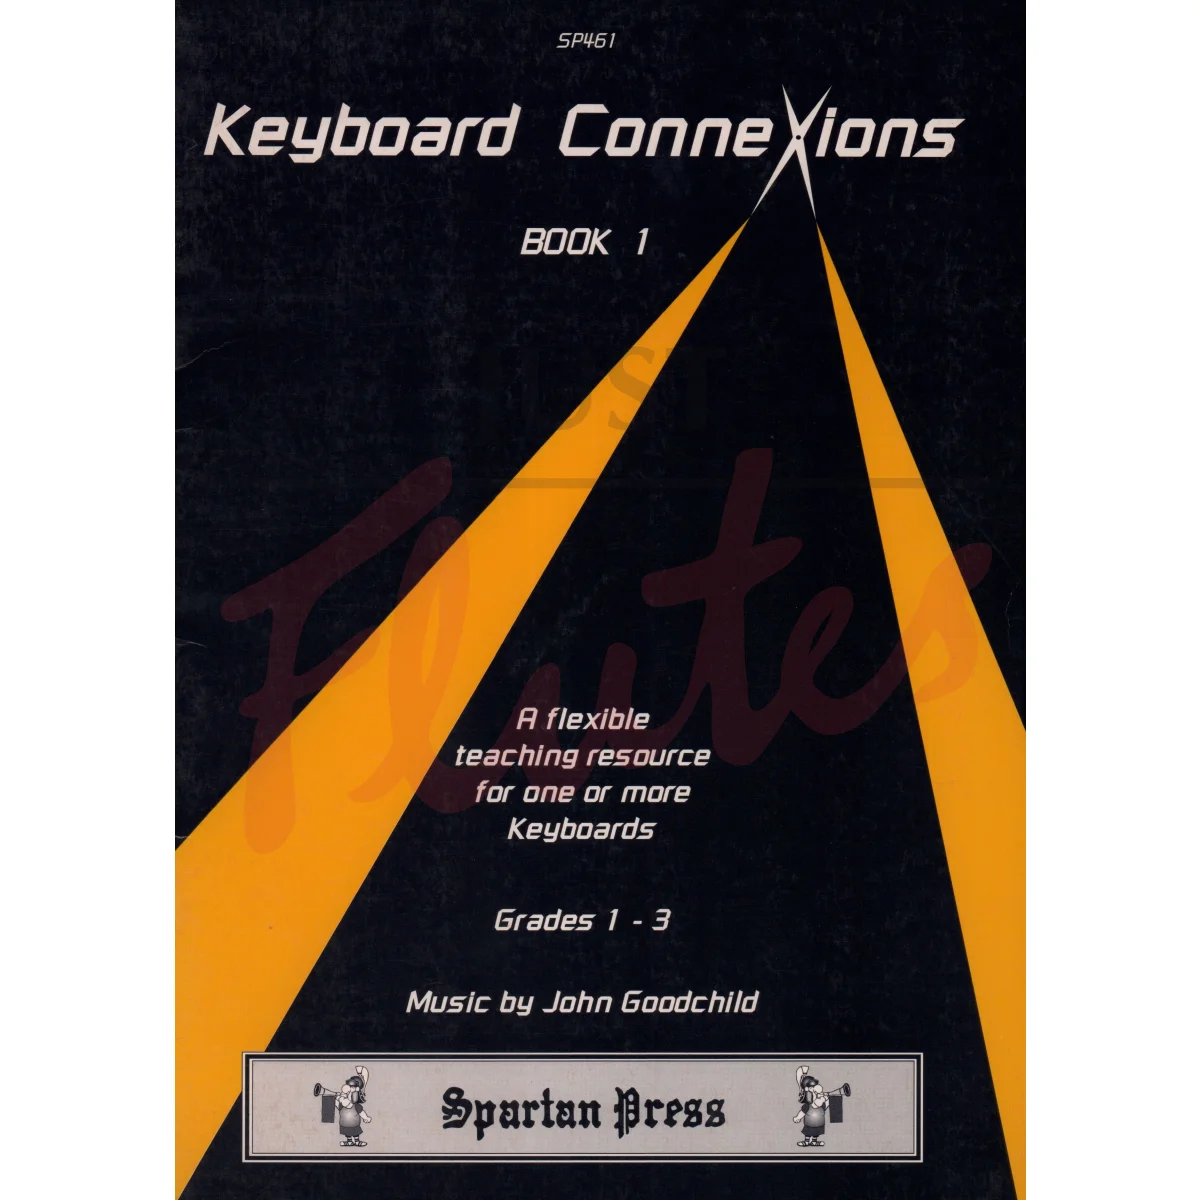 Keyboard Connexions Book 1